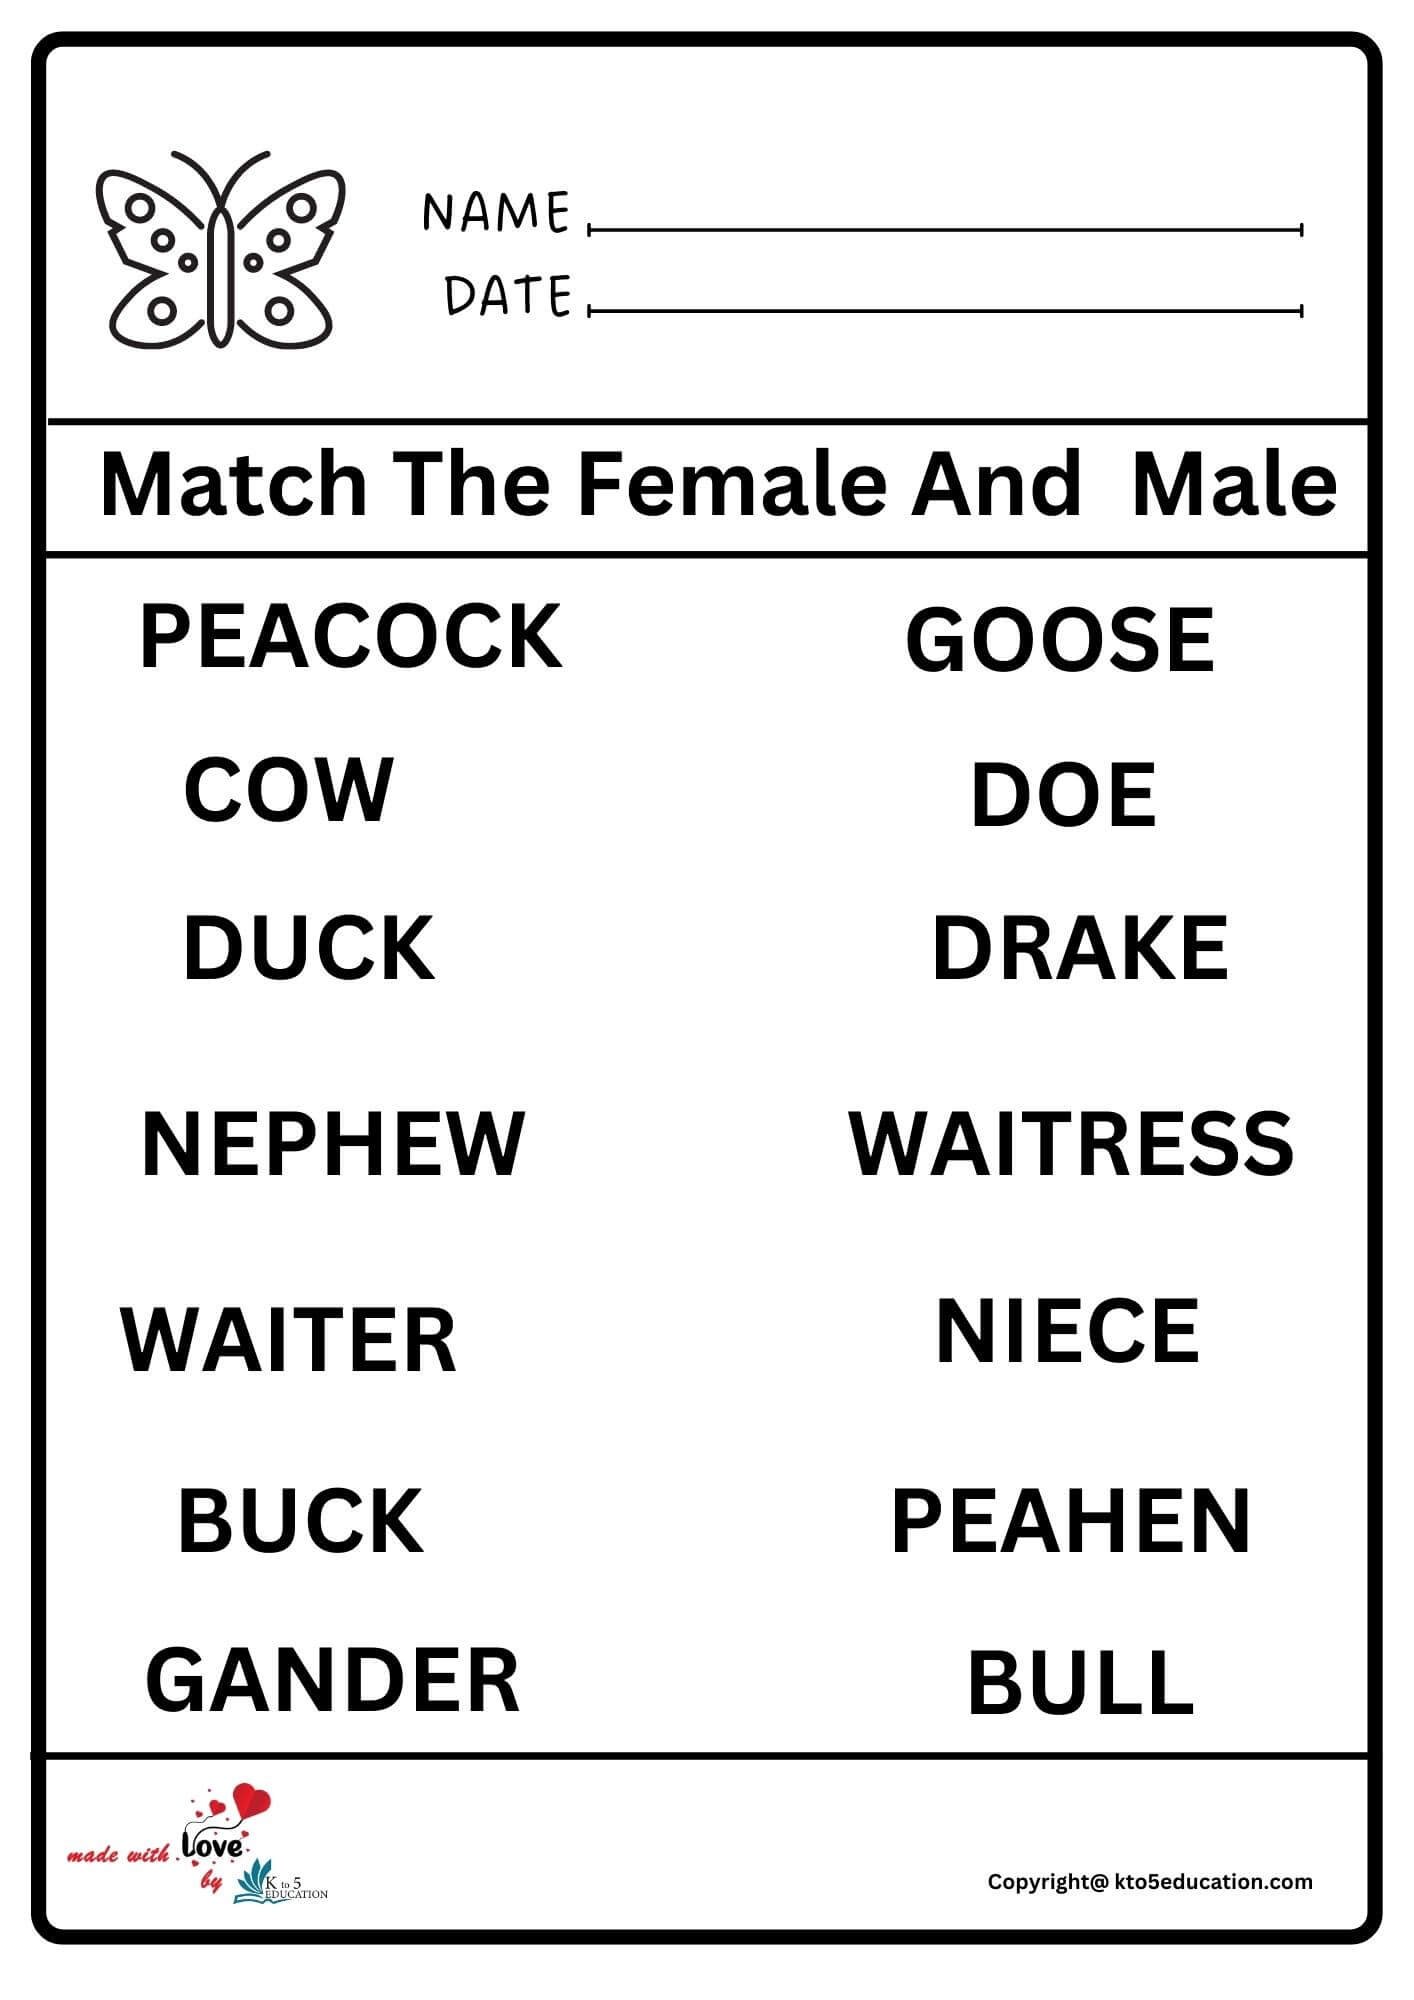 Match The Female And Male Worksheet 2